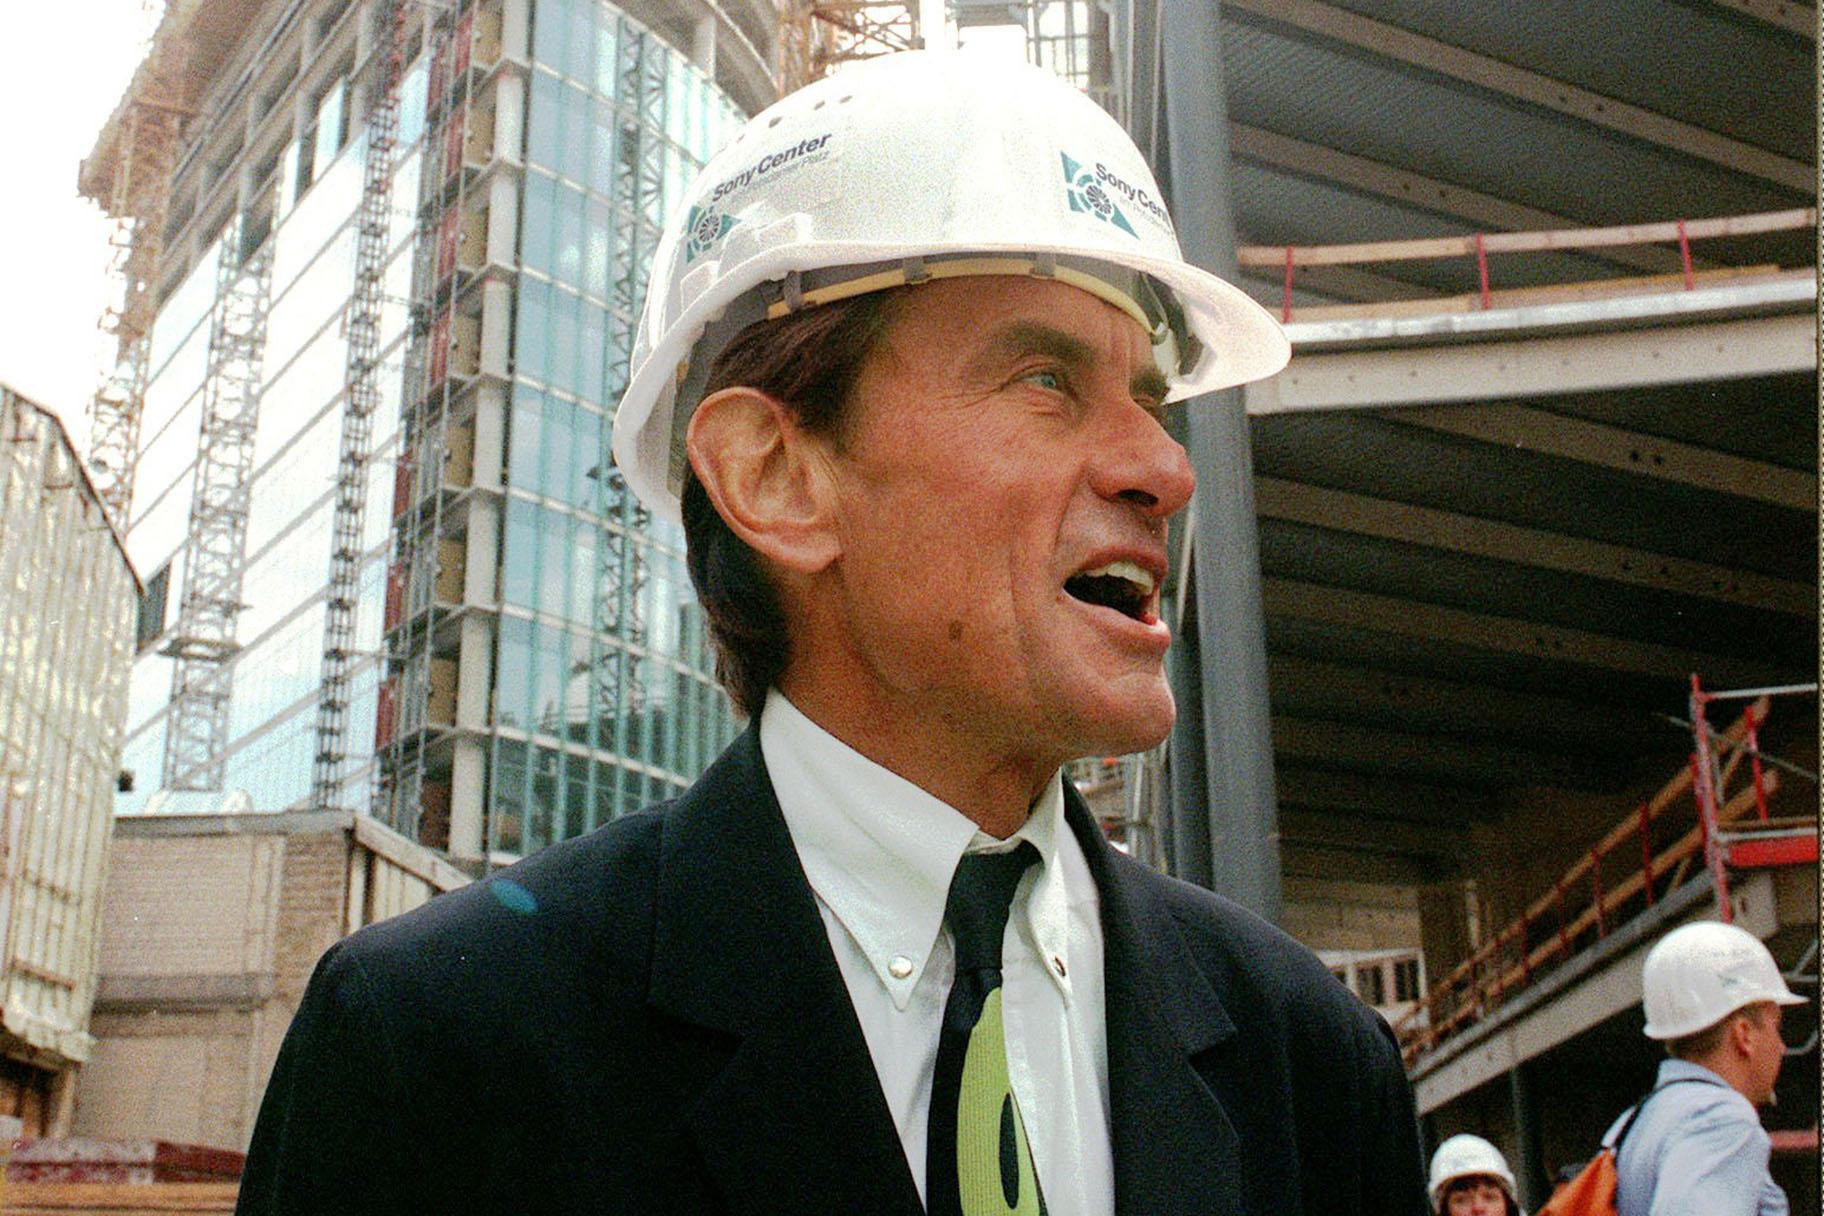 In this Wednesday, July 15, 1998 file photo, architect Helmut Jahn tours a construction site in Berlin. (AP Photos / Jockel Finck)